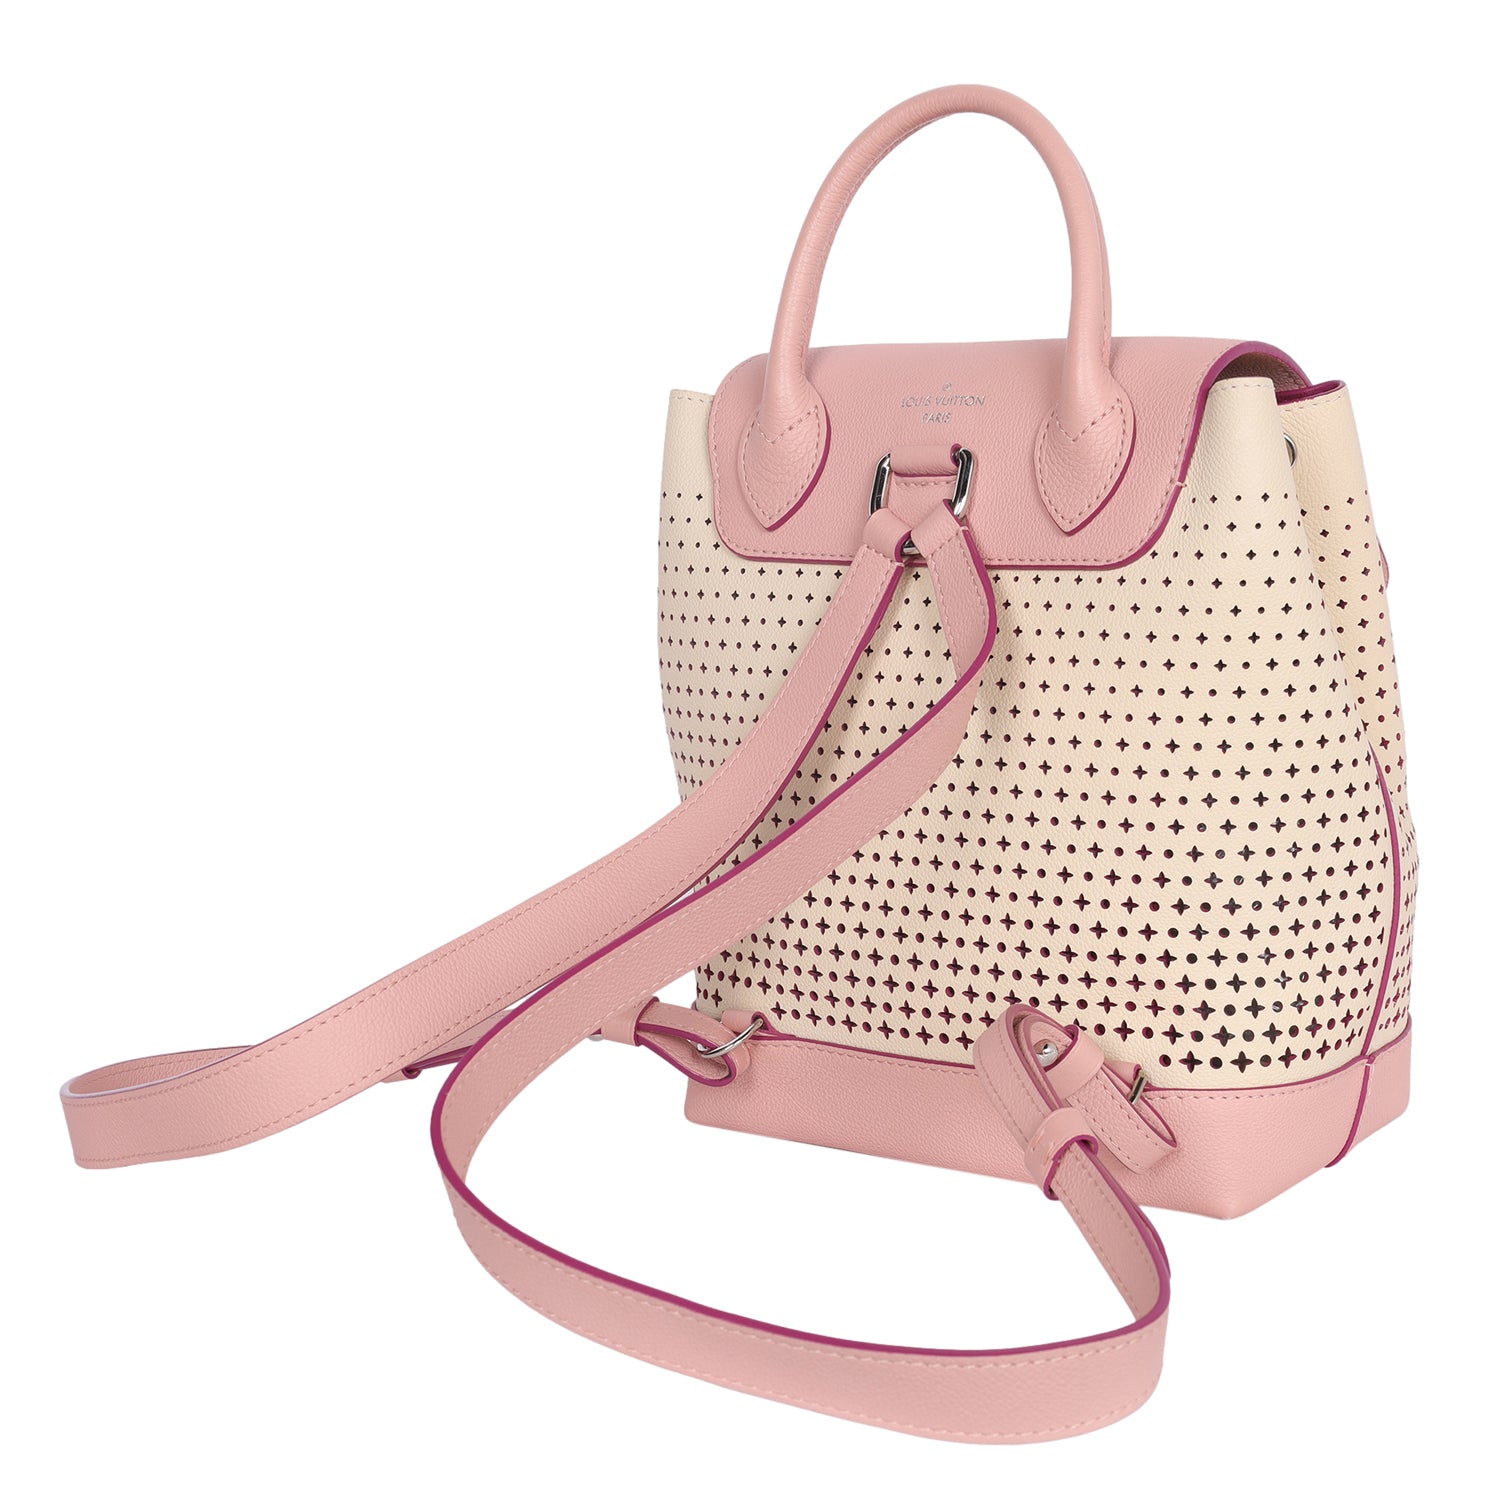 Ladies check out this LV Lockme Bucket Bag and the pink interior